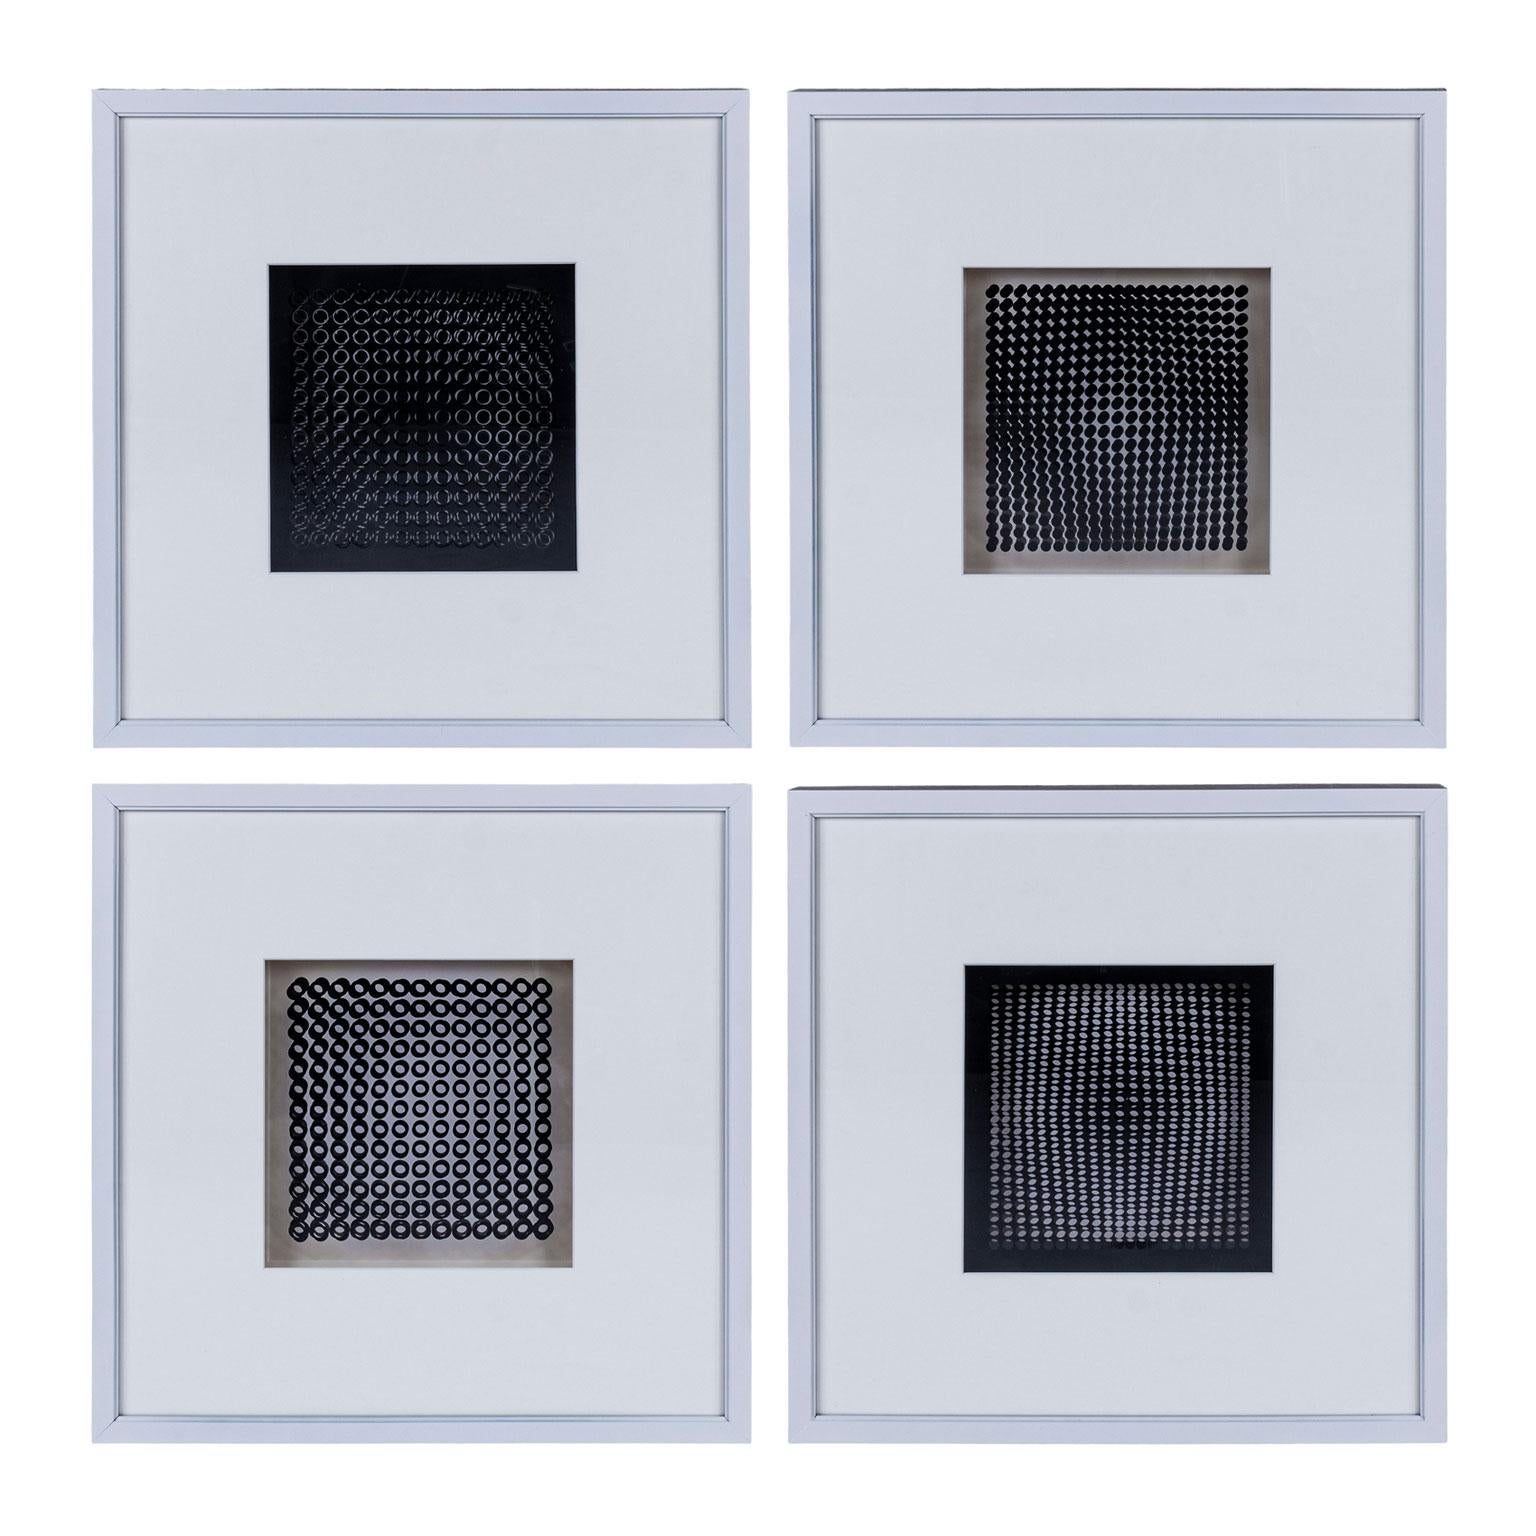 Swiss Four Vasarely Prints, Oeuvres Profondes